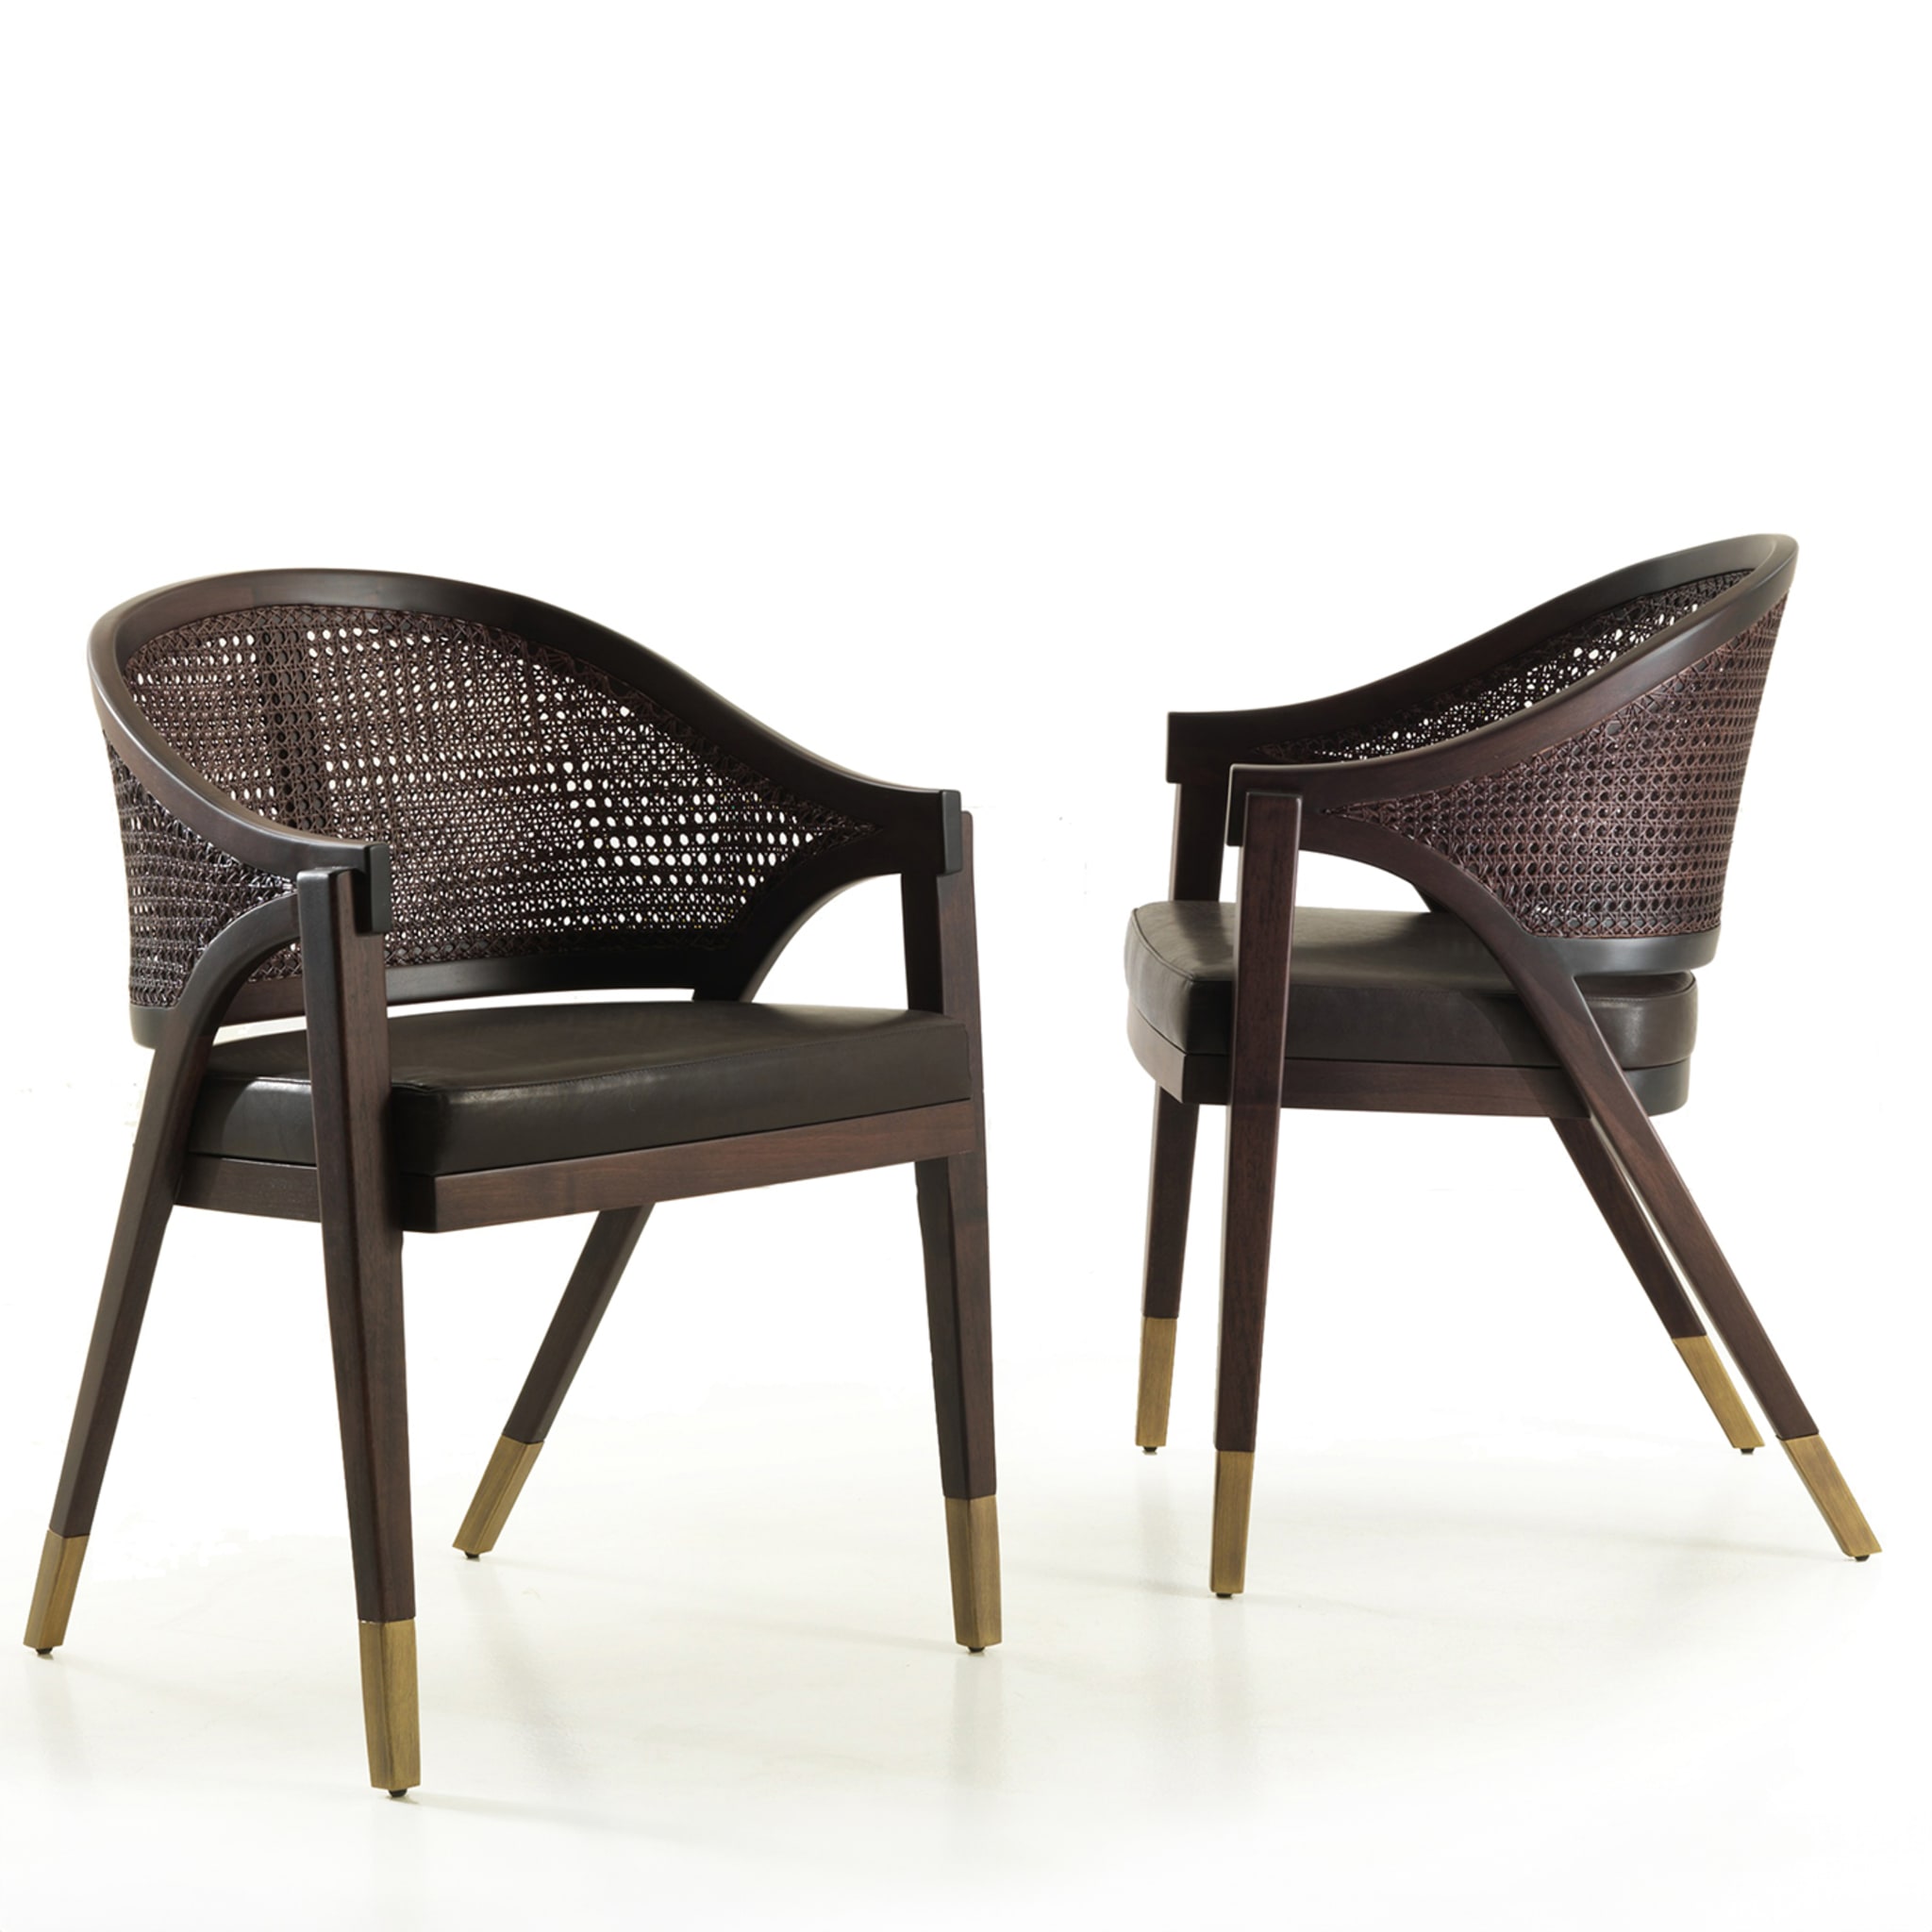 Sabaudia Viennese Cane Armchair by Archer Humphryes Architects - Alternative view 1